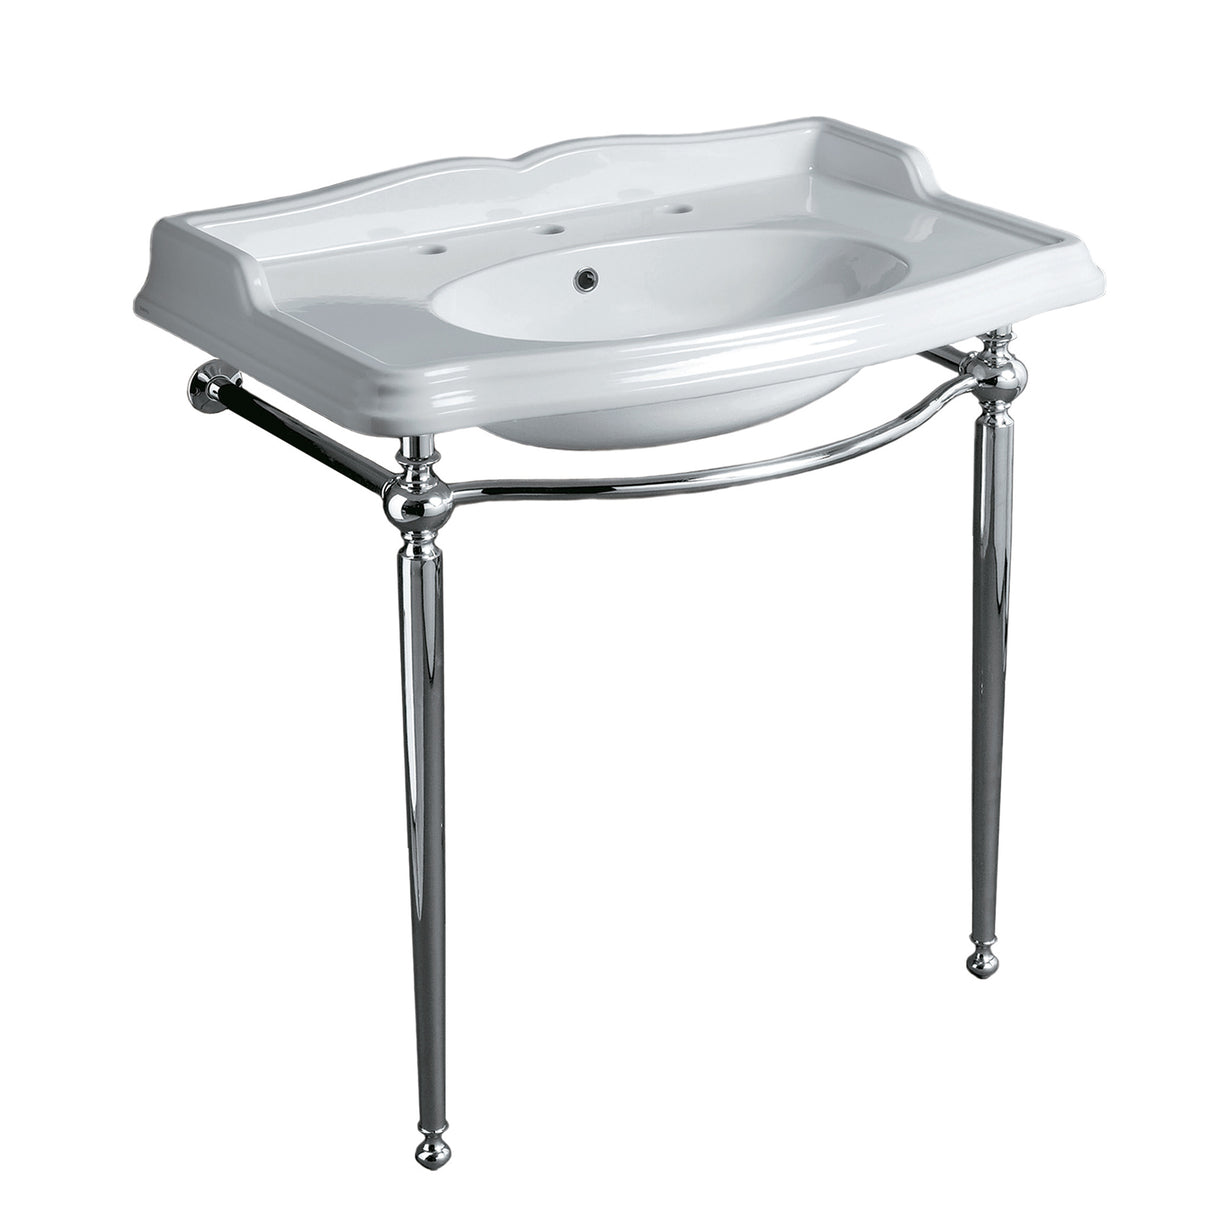 Britannia Large Rectangular Sink Console with Front Towel Bar and Widespread Faucet Hole Drill